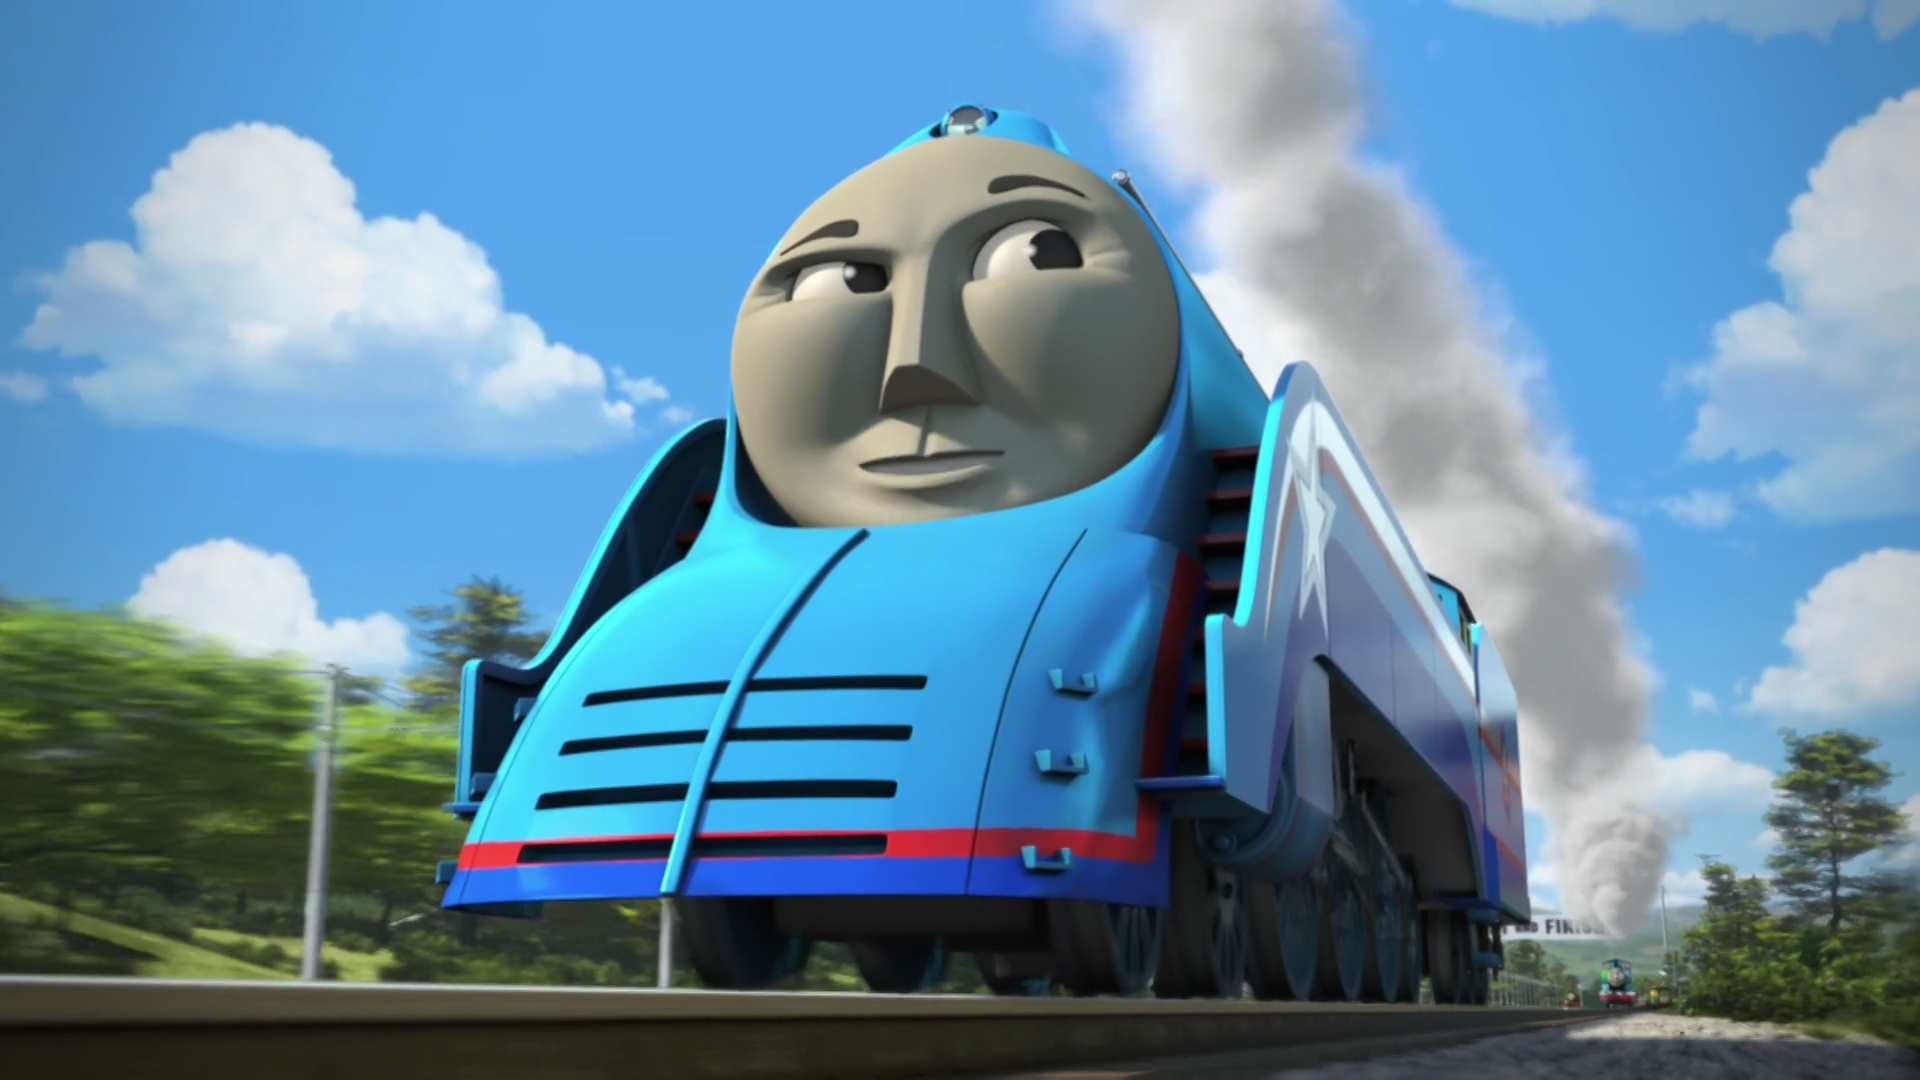 thomas and friends shooting star